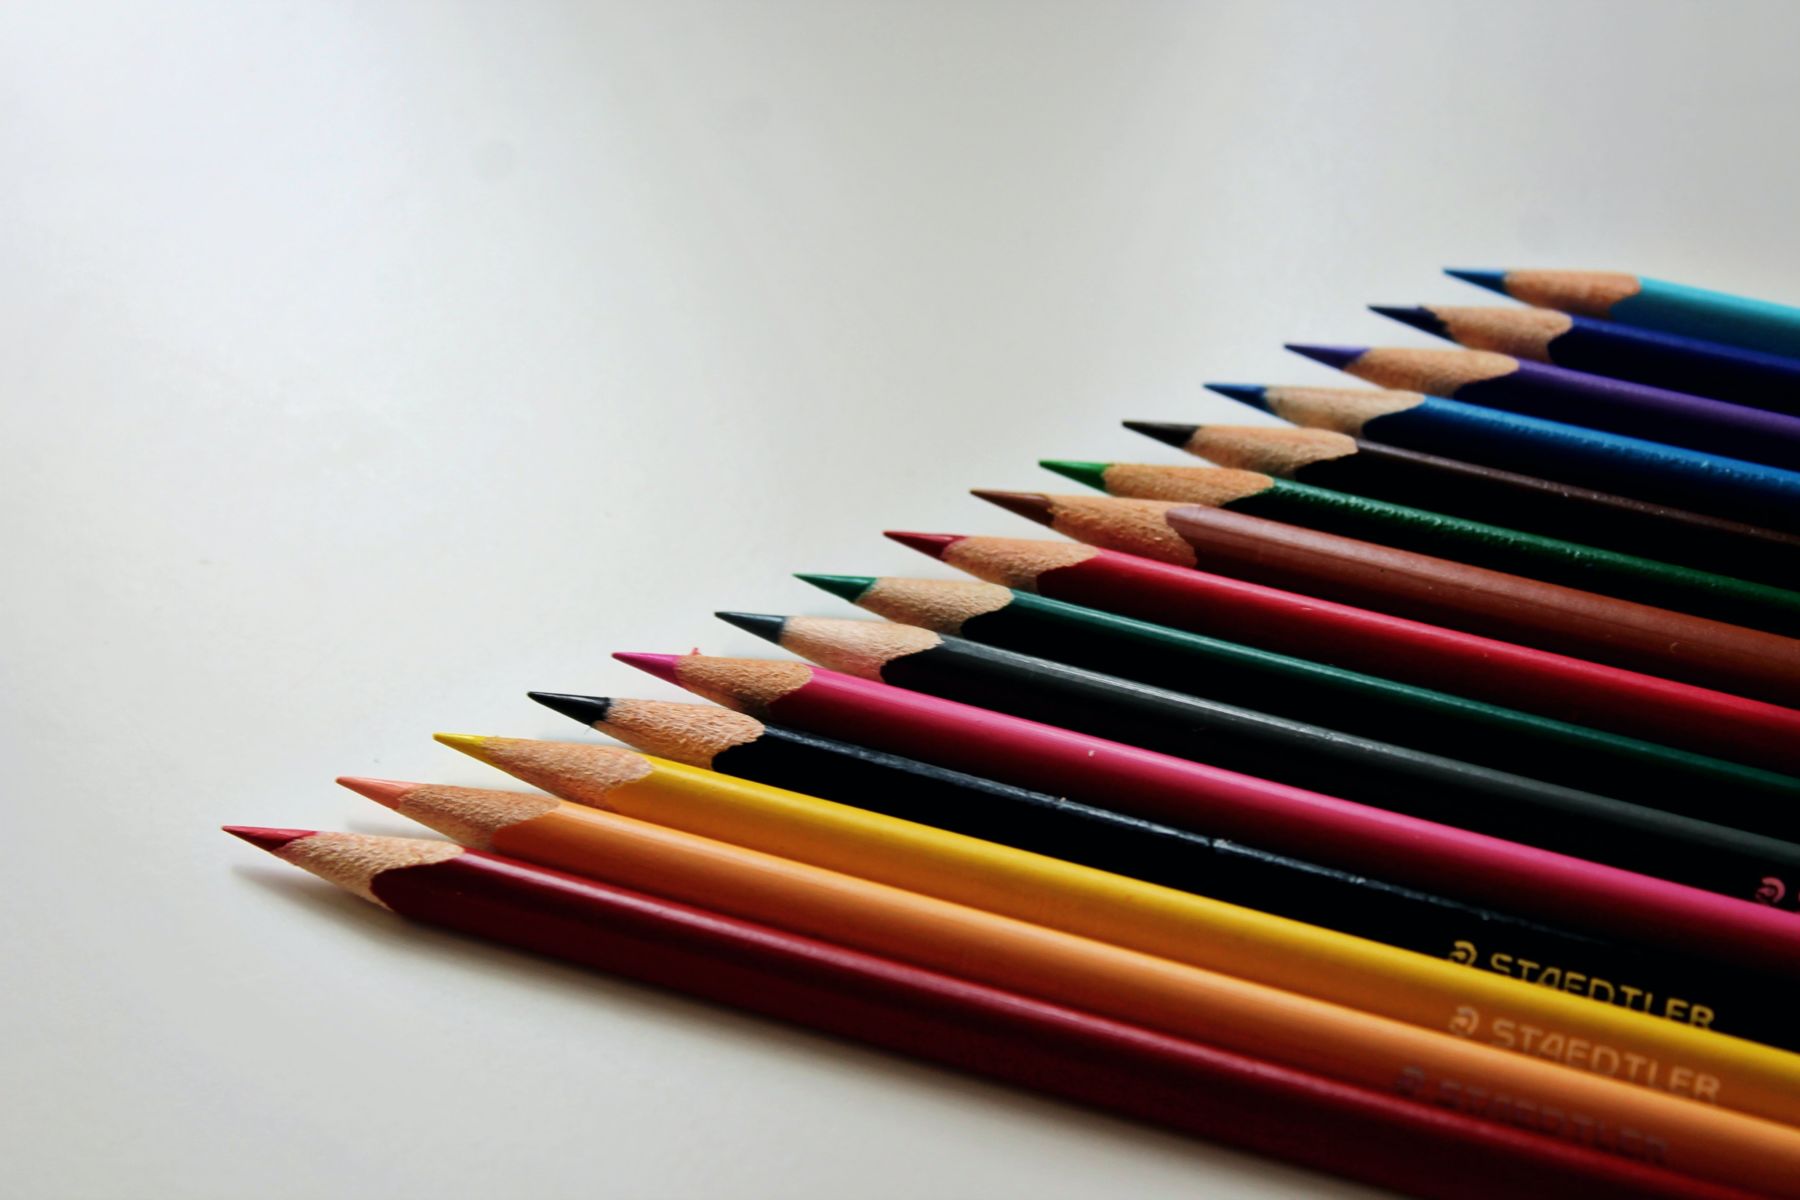 Pencils, The courage to listen